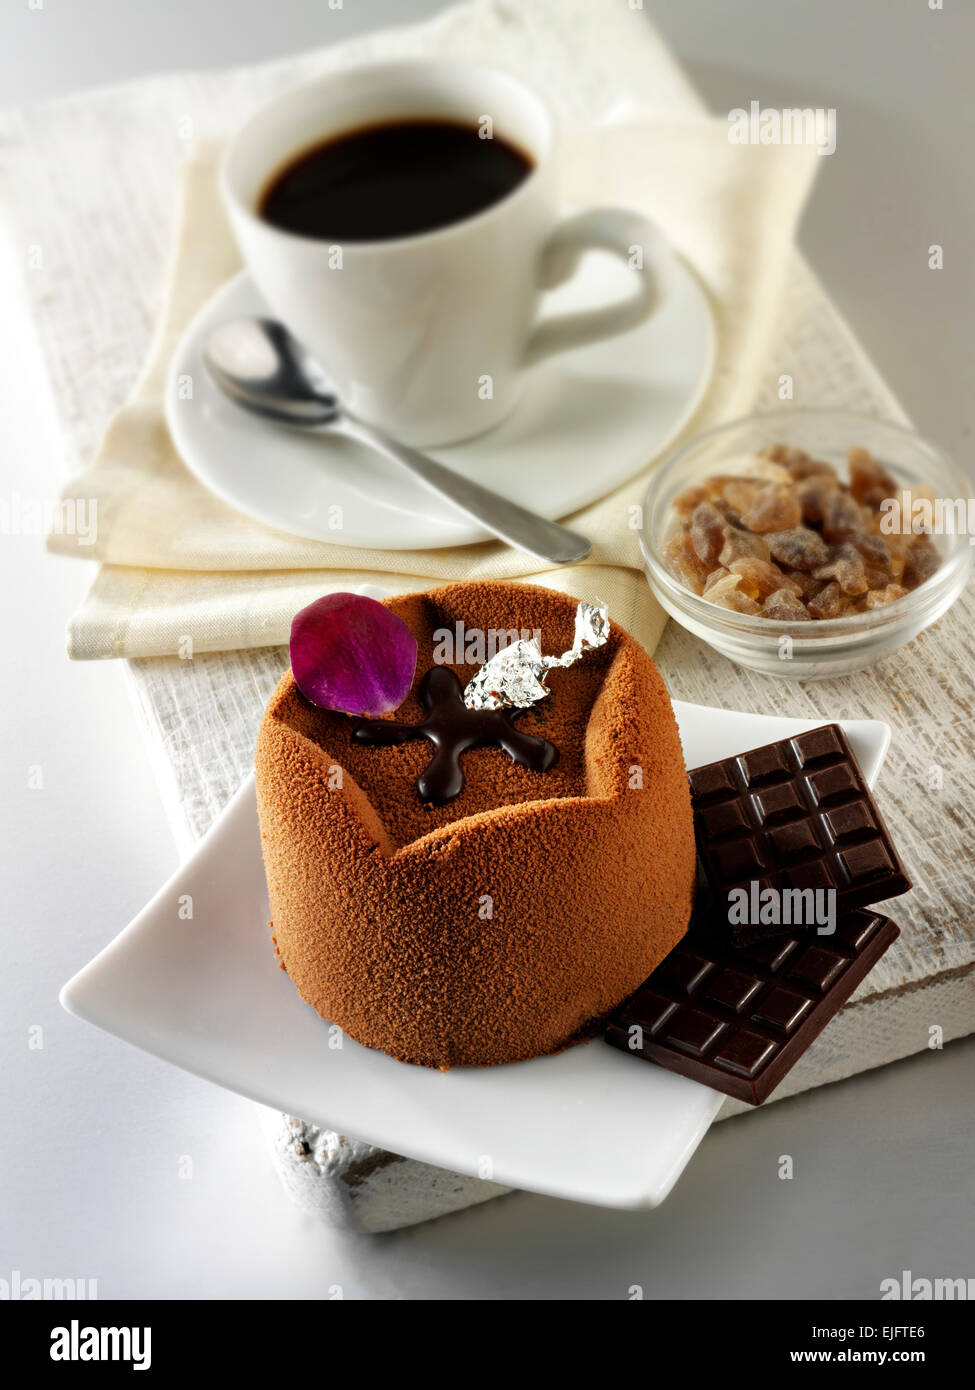 Chocolate cake with a molded chocolate case and a chocolate filling, covered with cocoa powder Stock Photo